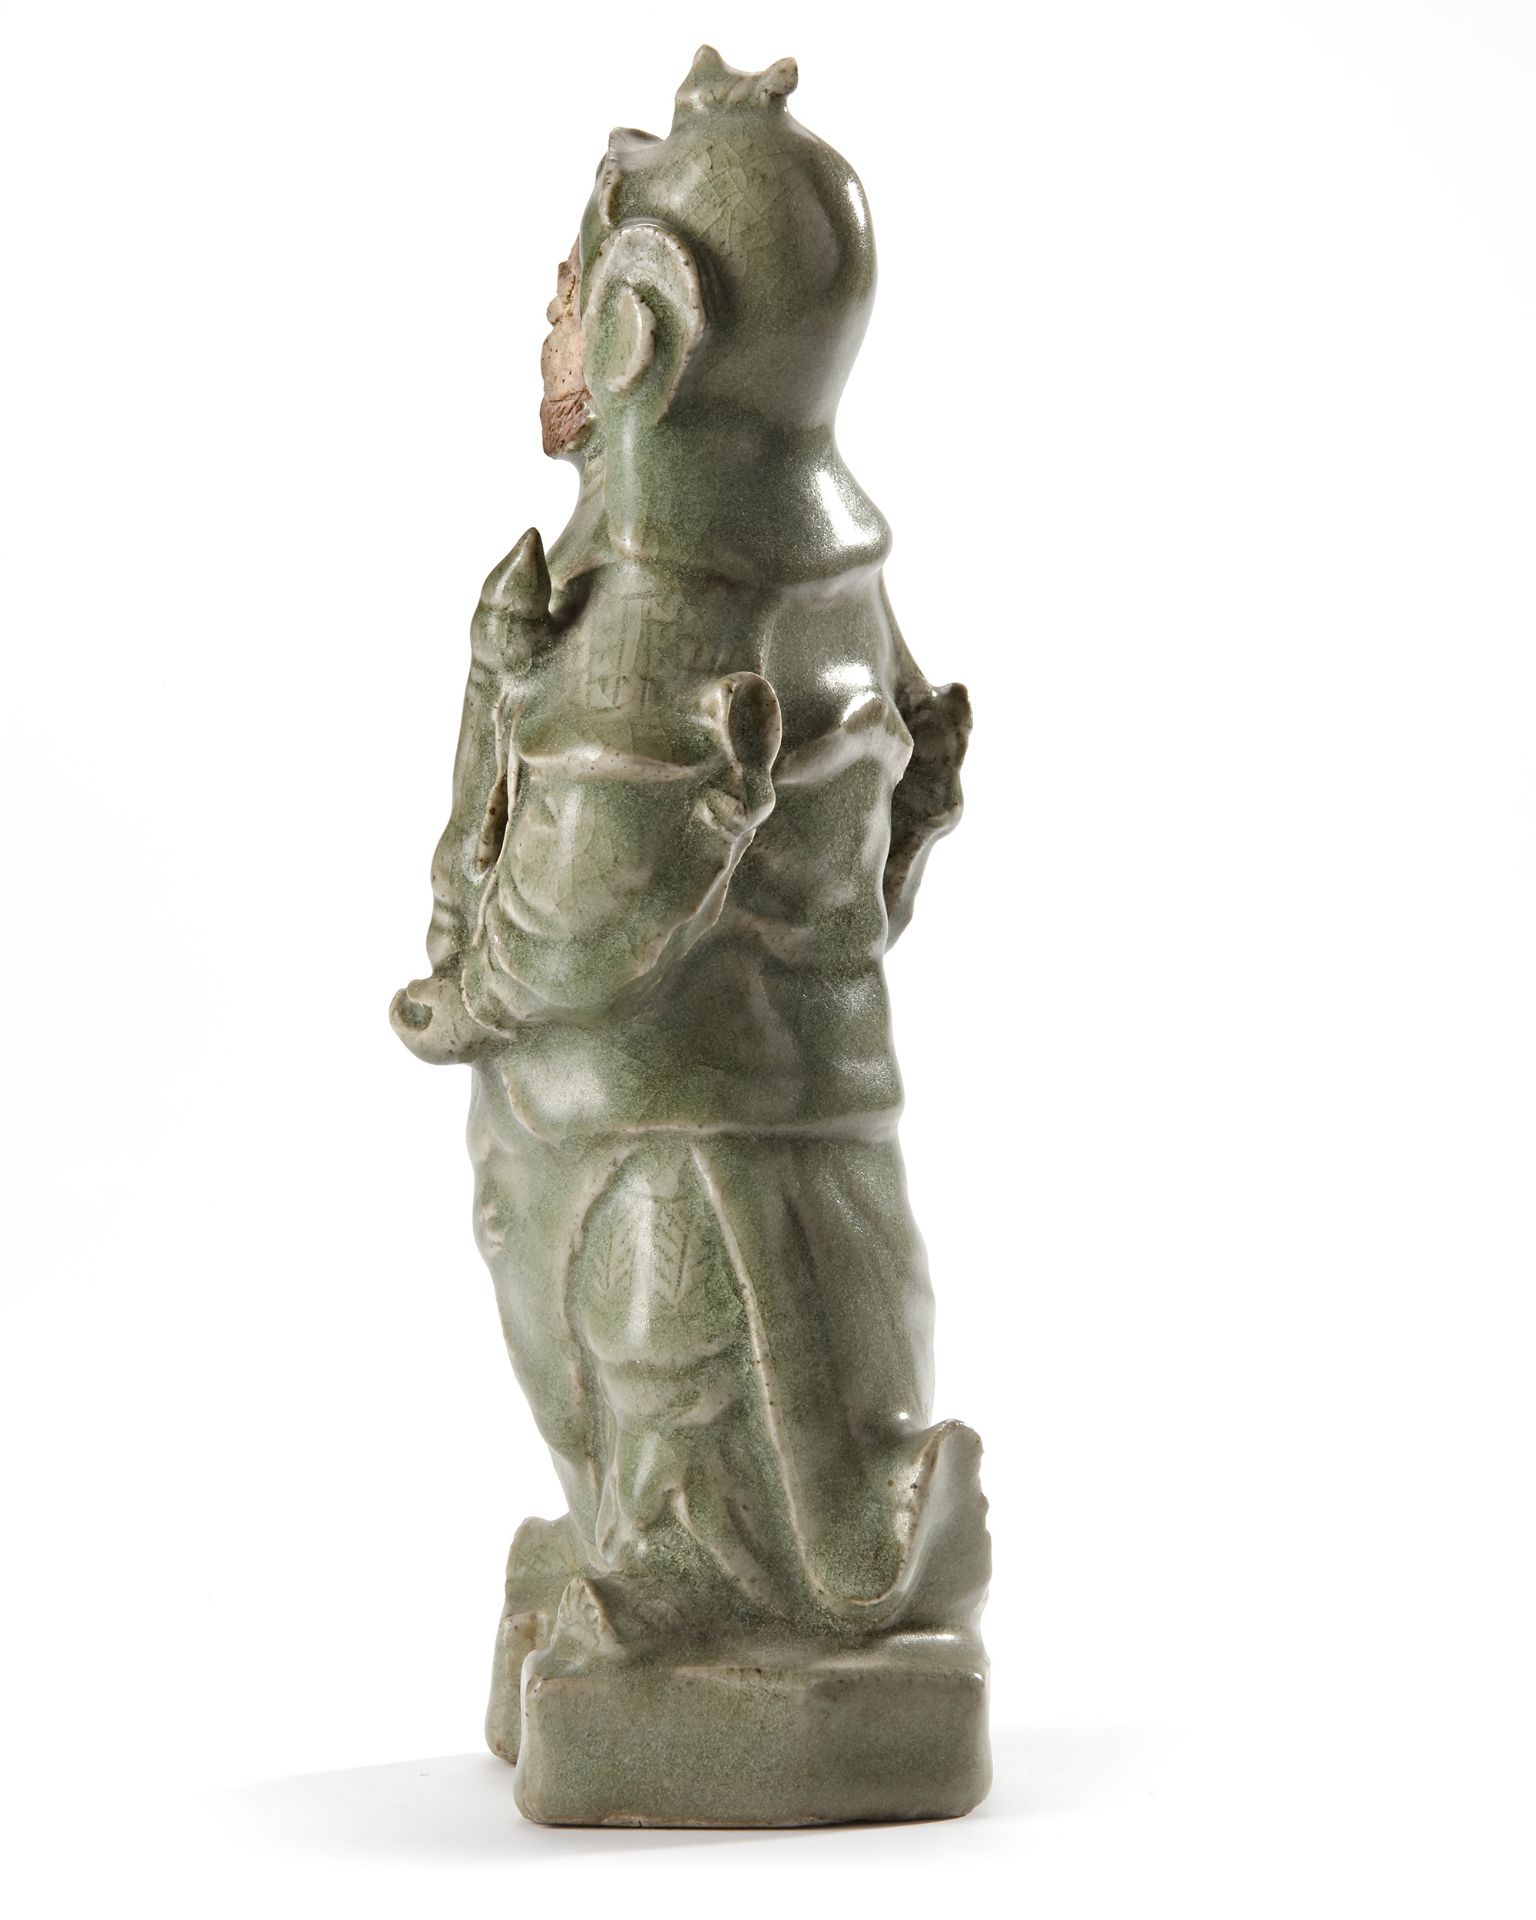 A CHINESE CELADON GUAN YU FIGURE, MING DYNASTY, 15TH CENTURY - Image 3 of 6